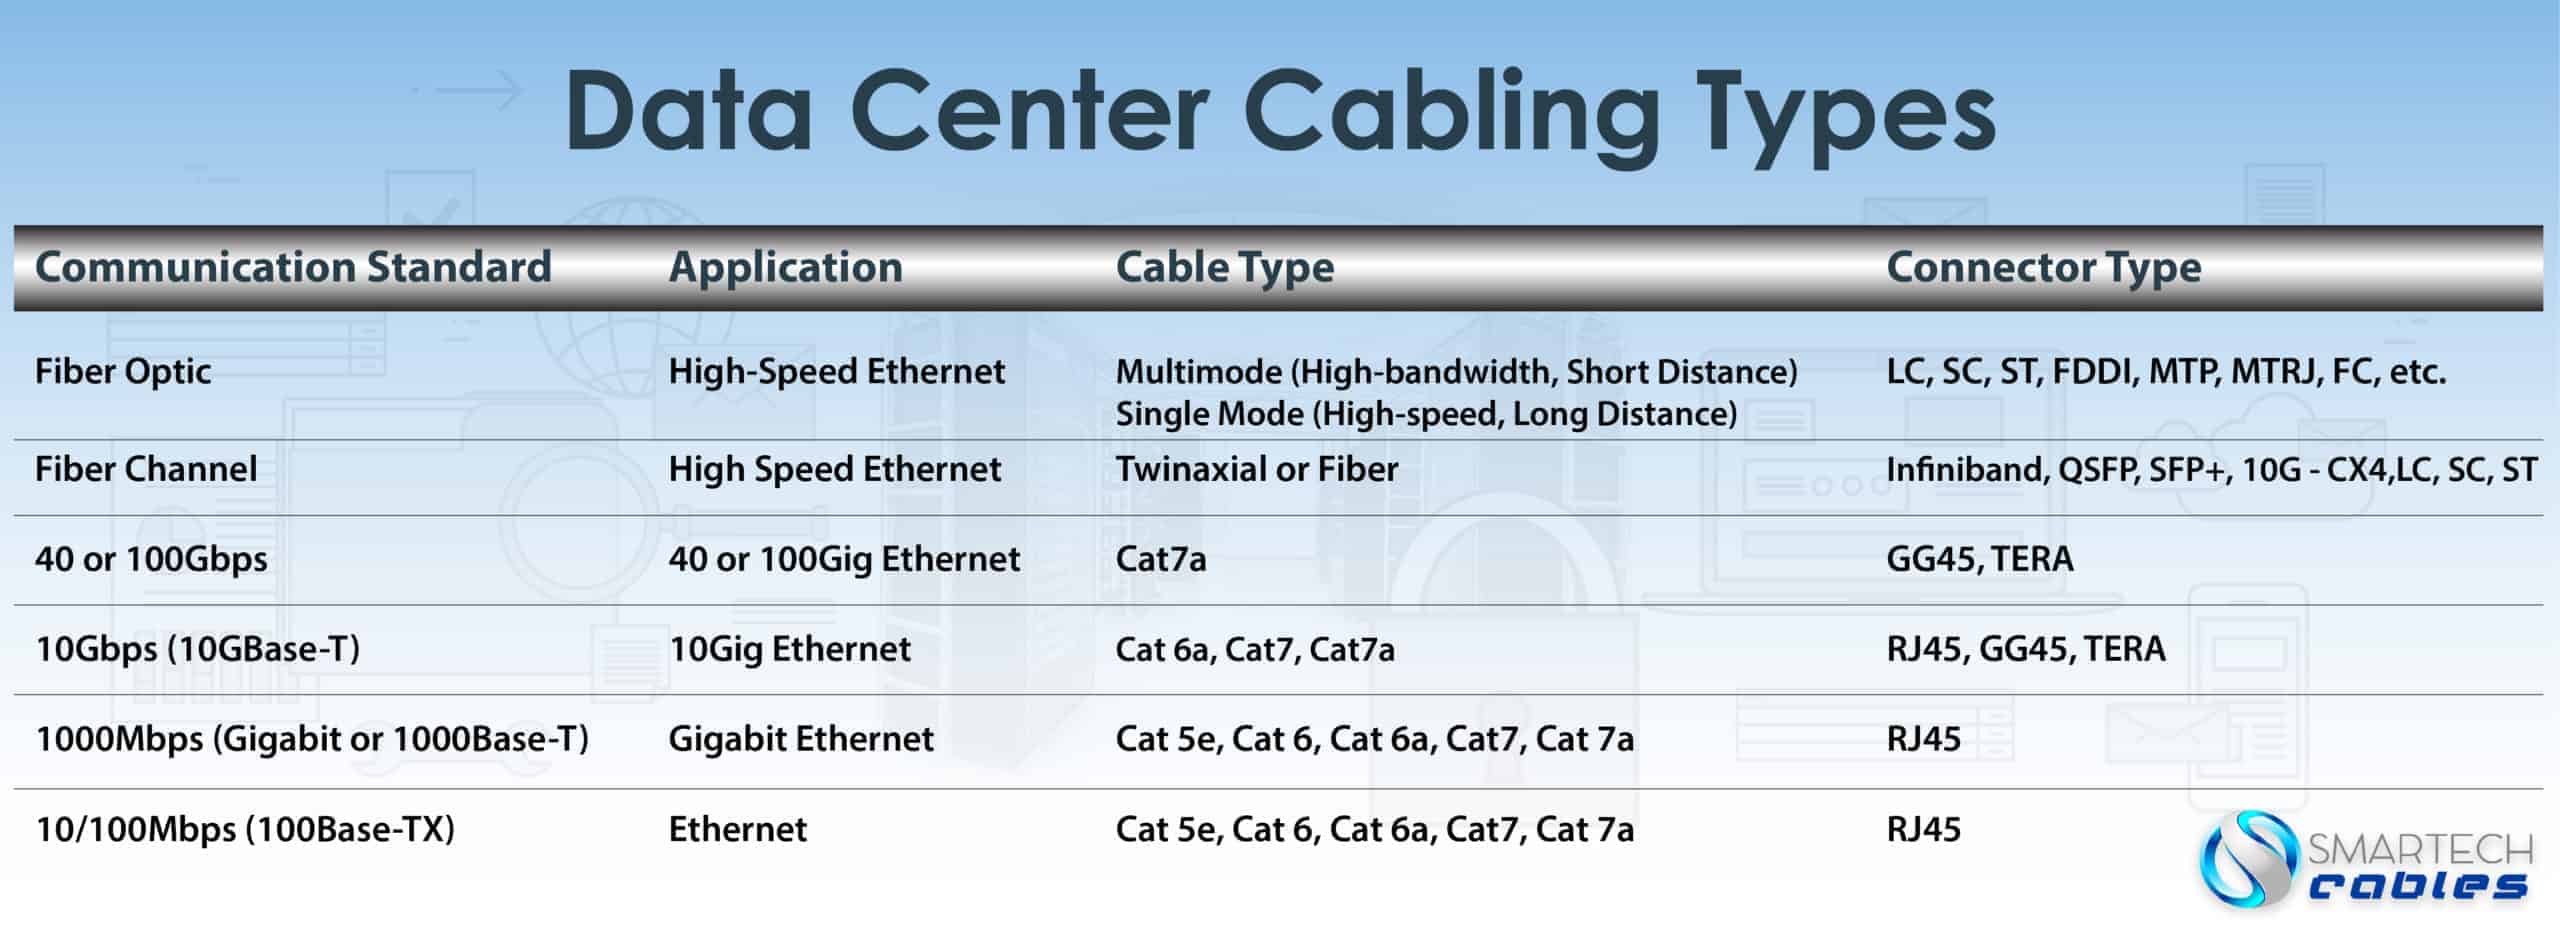 Cabling Types in Data Centers: